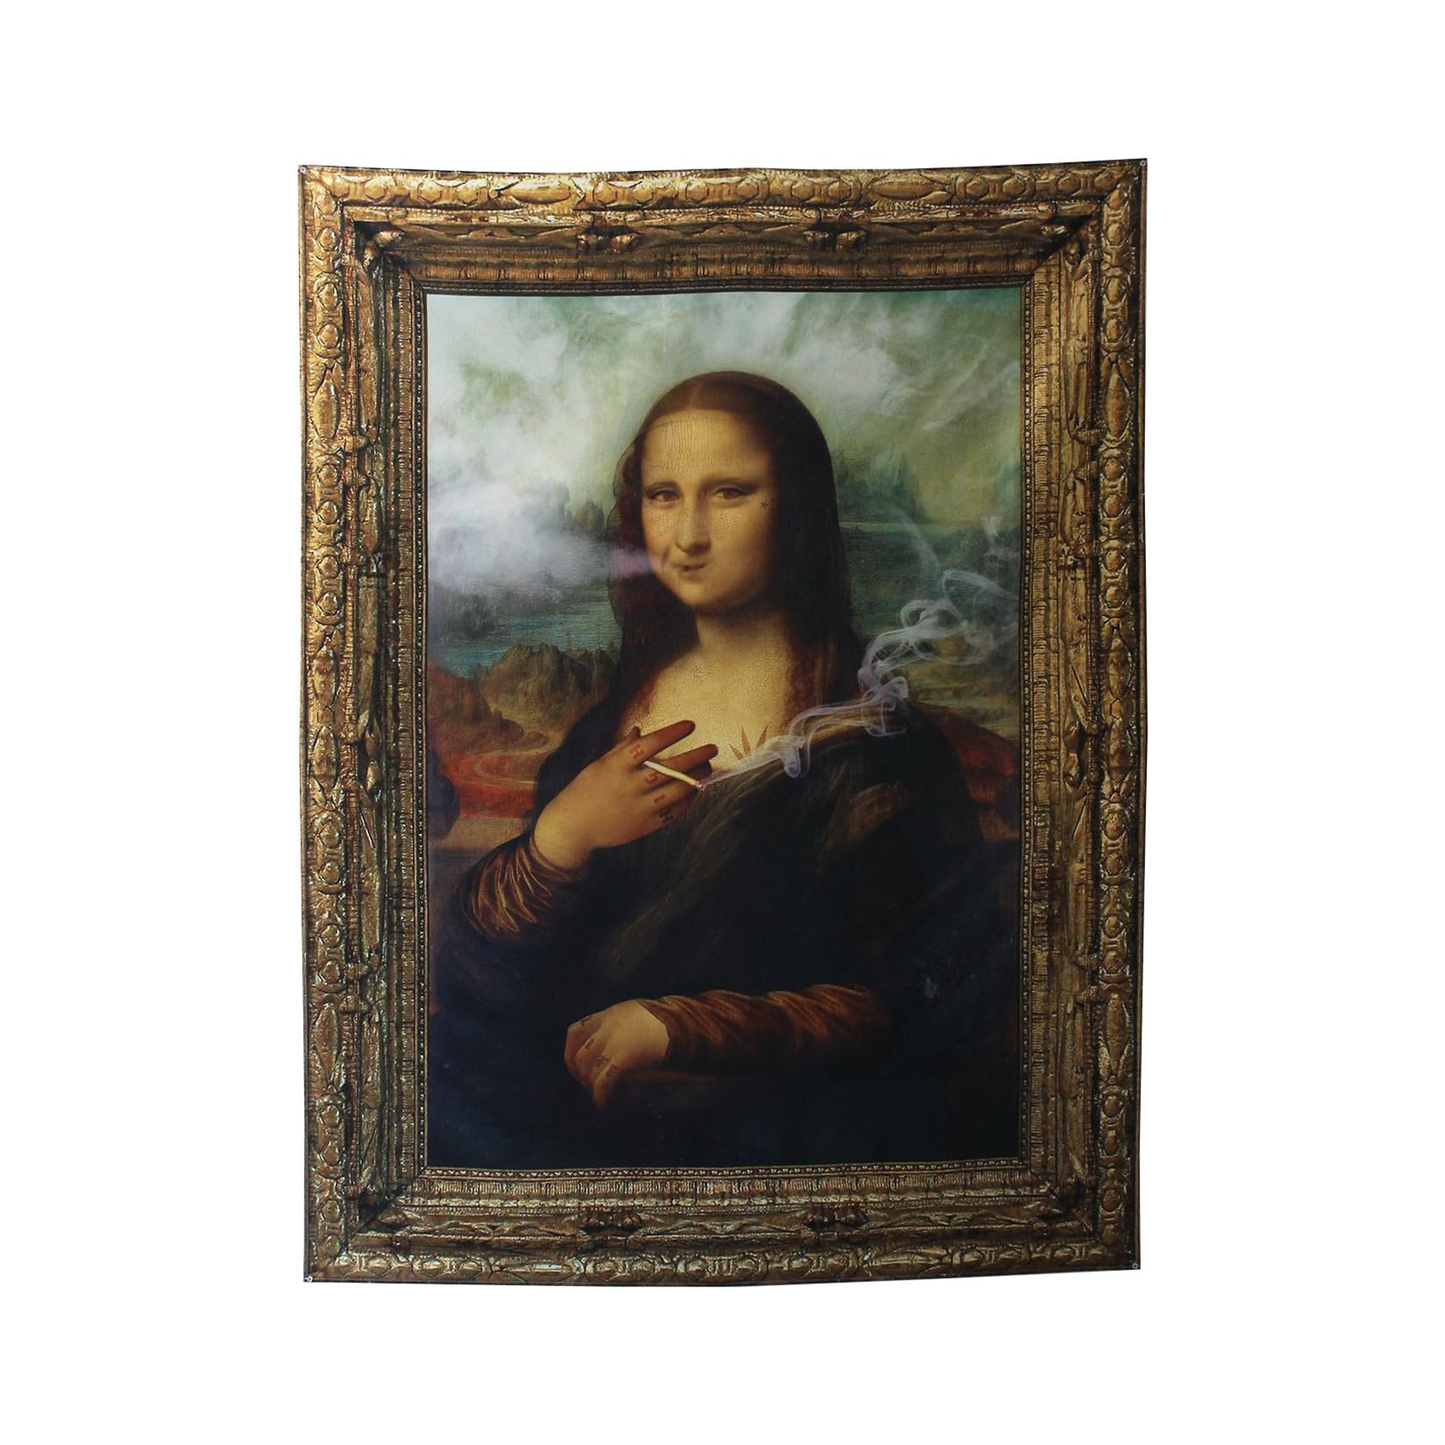 Stoned Cold Classic Weed Tapestries - Mona Lisa